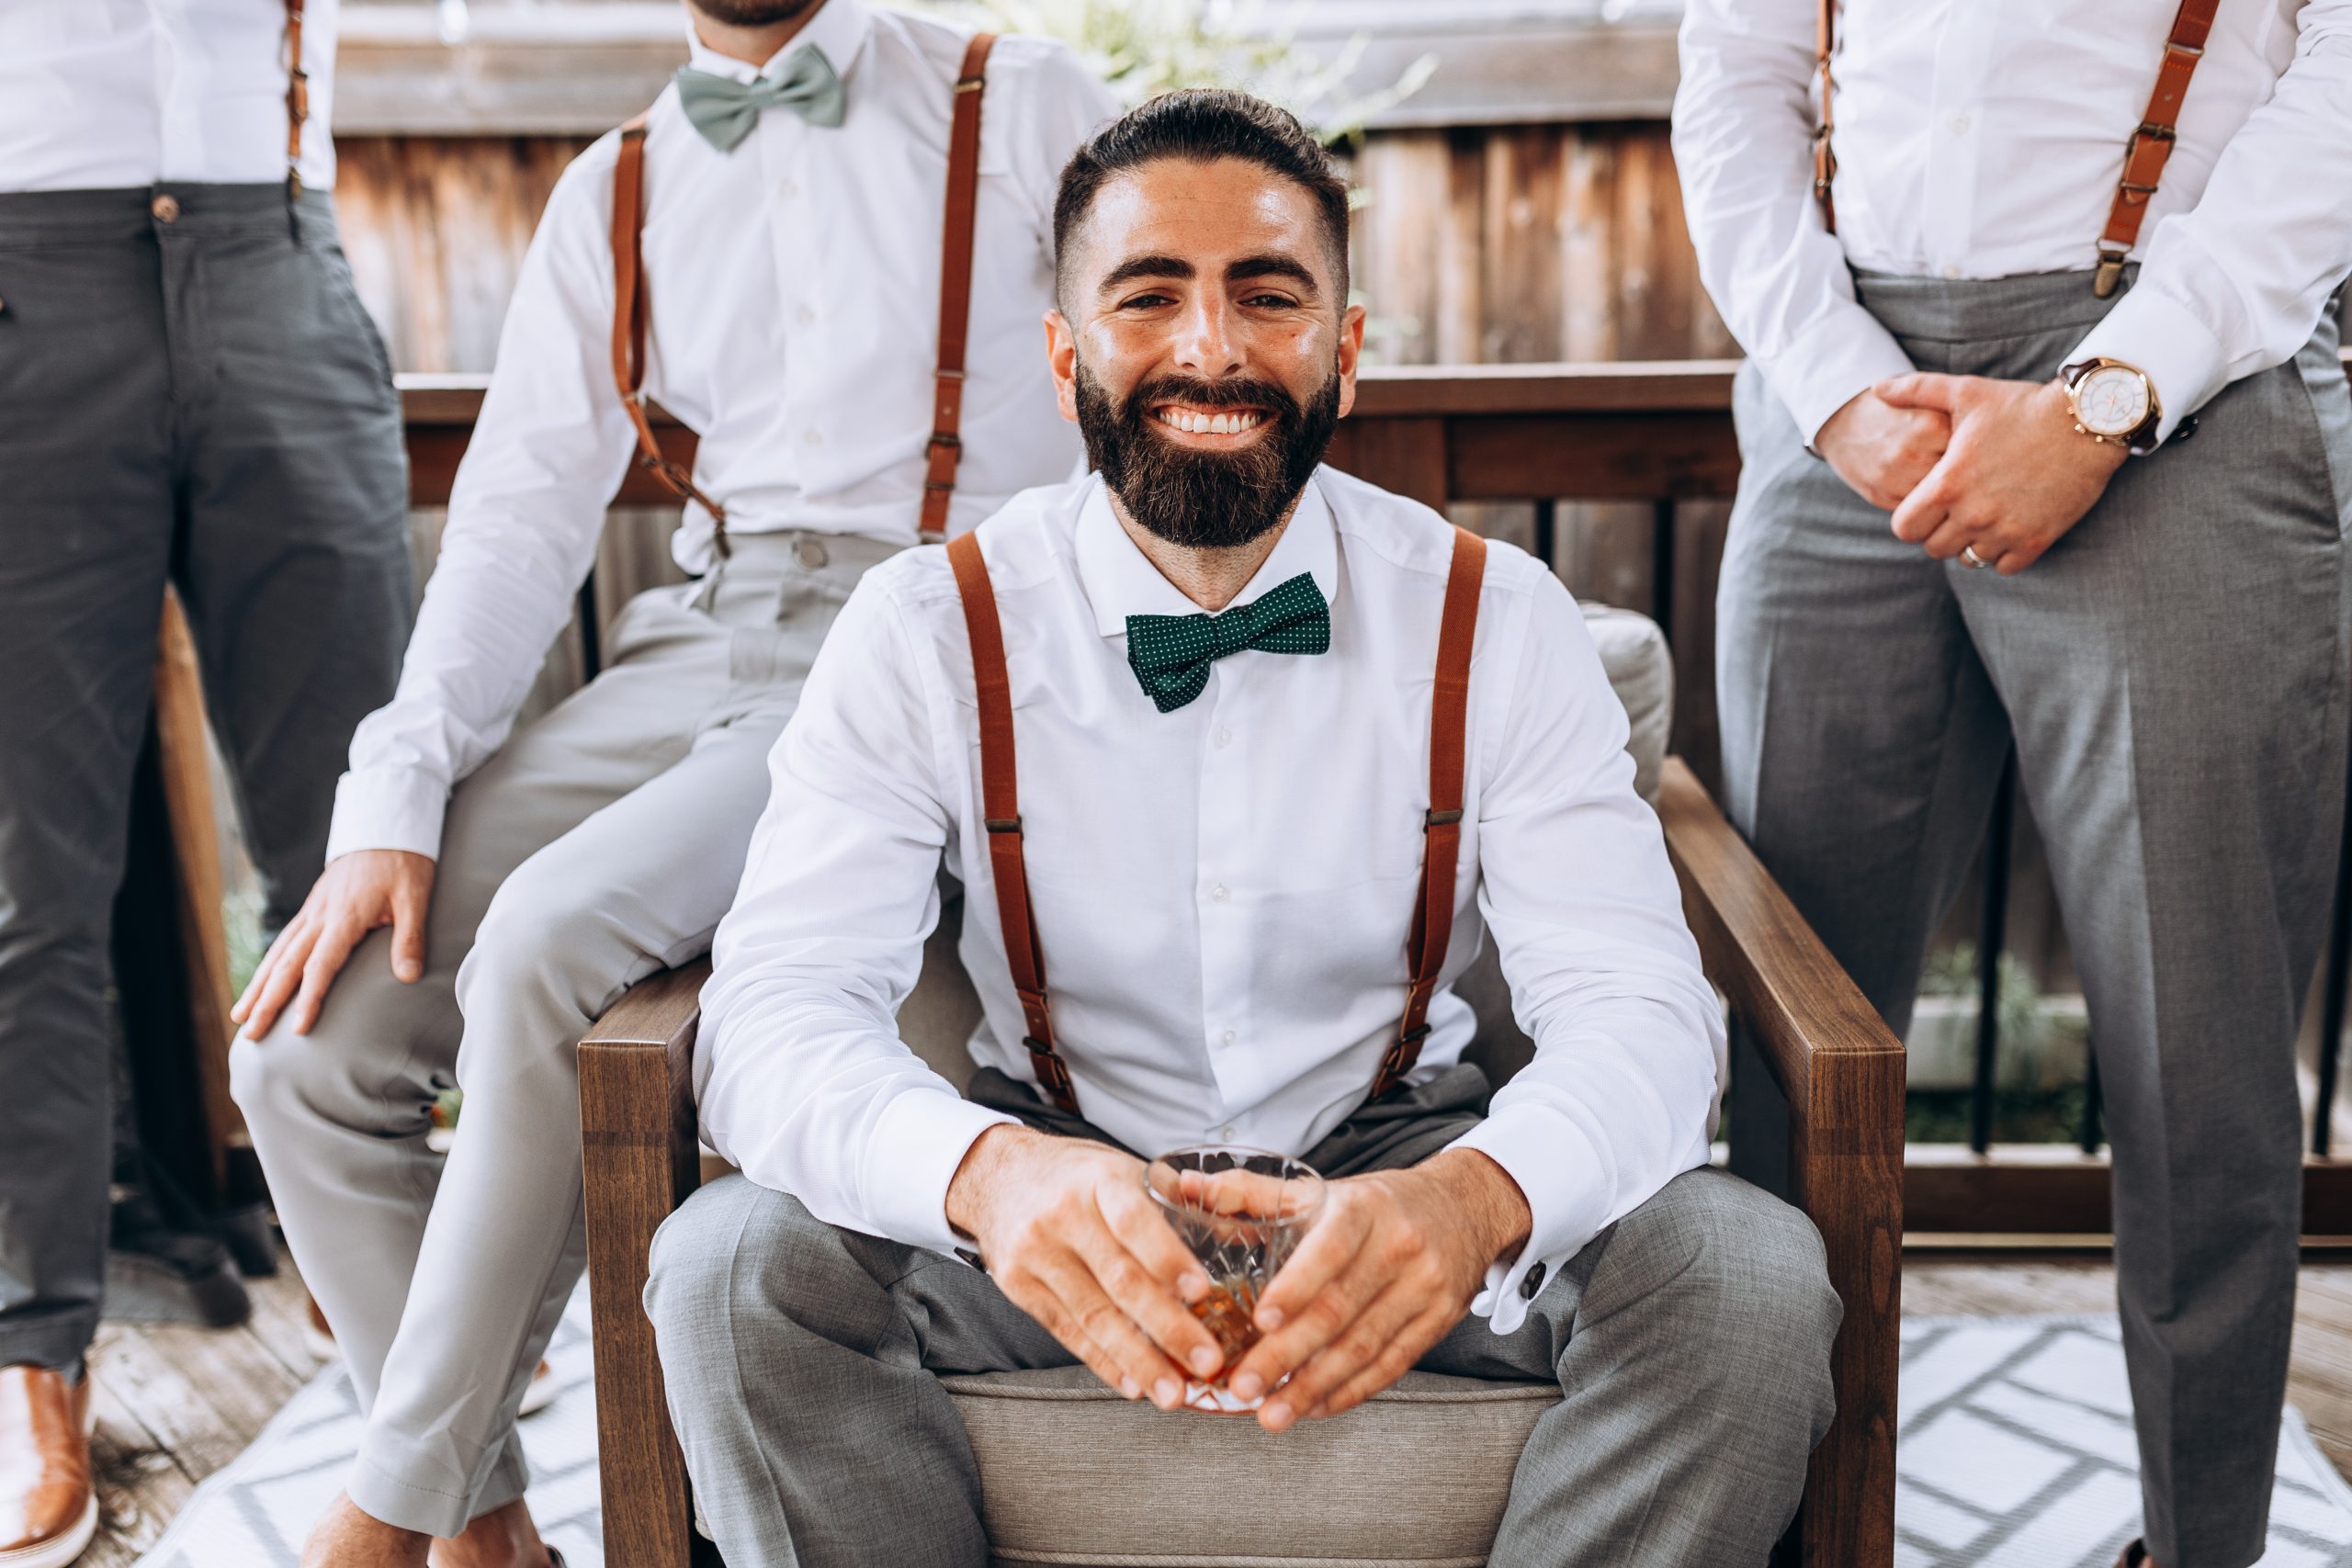 room is all smiles as his groomsmen stand behind him